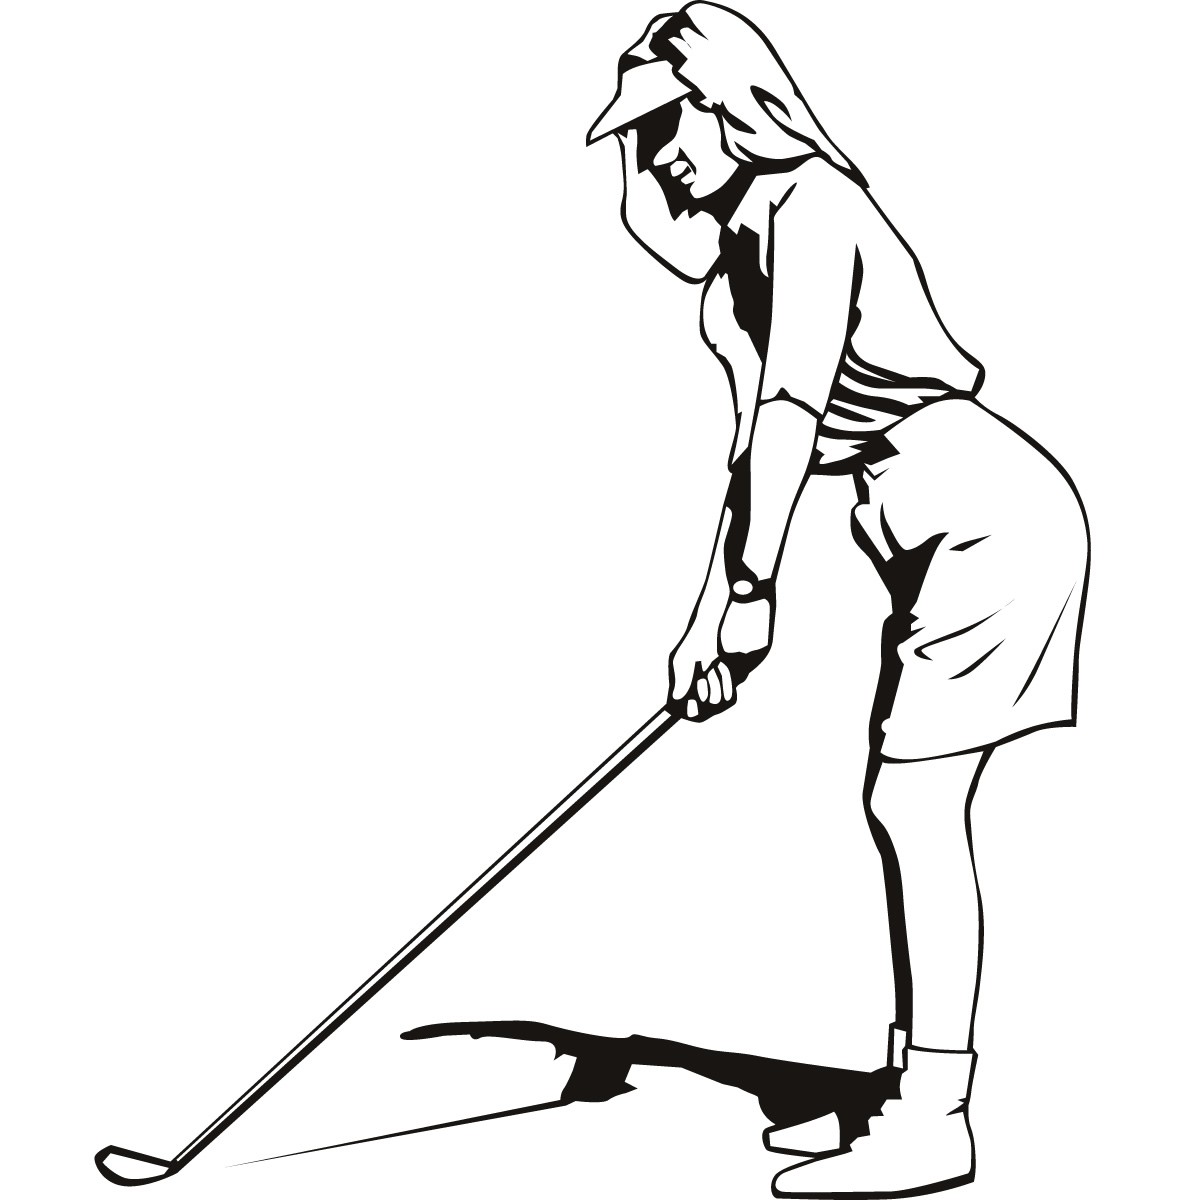 Clip Arts Related To : women golfer silhouette vector free. 